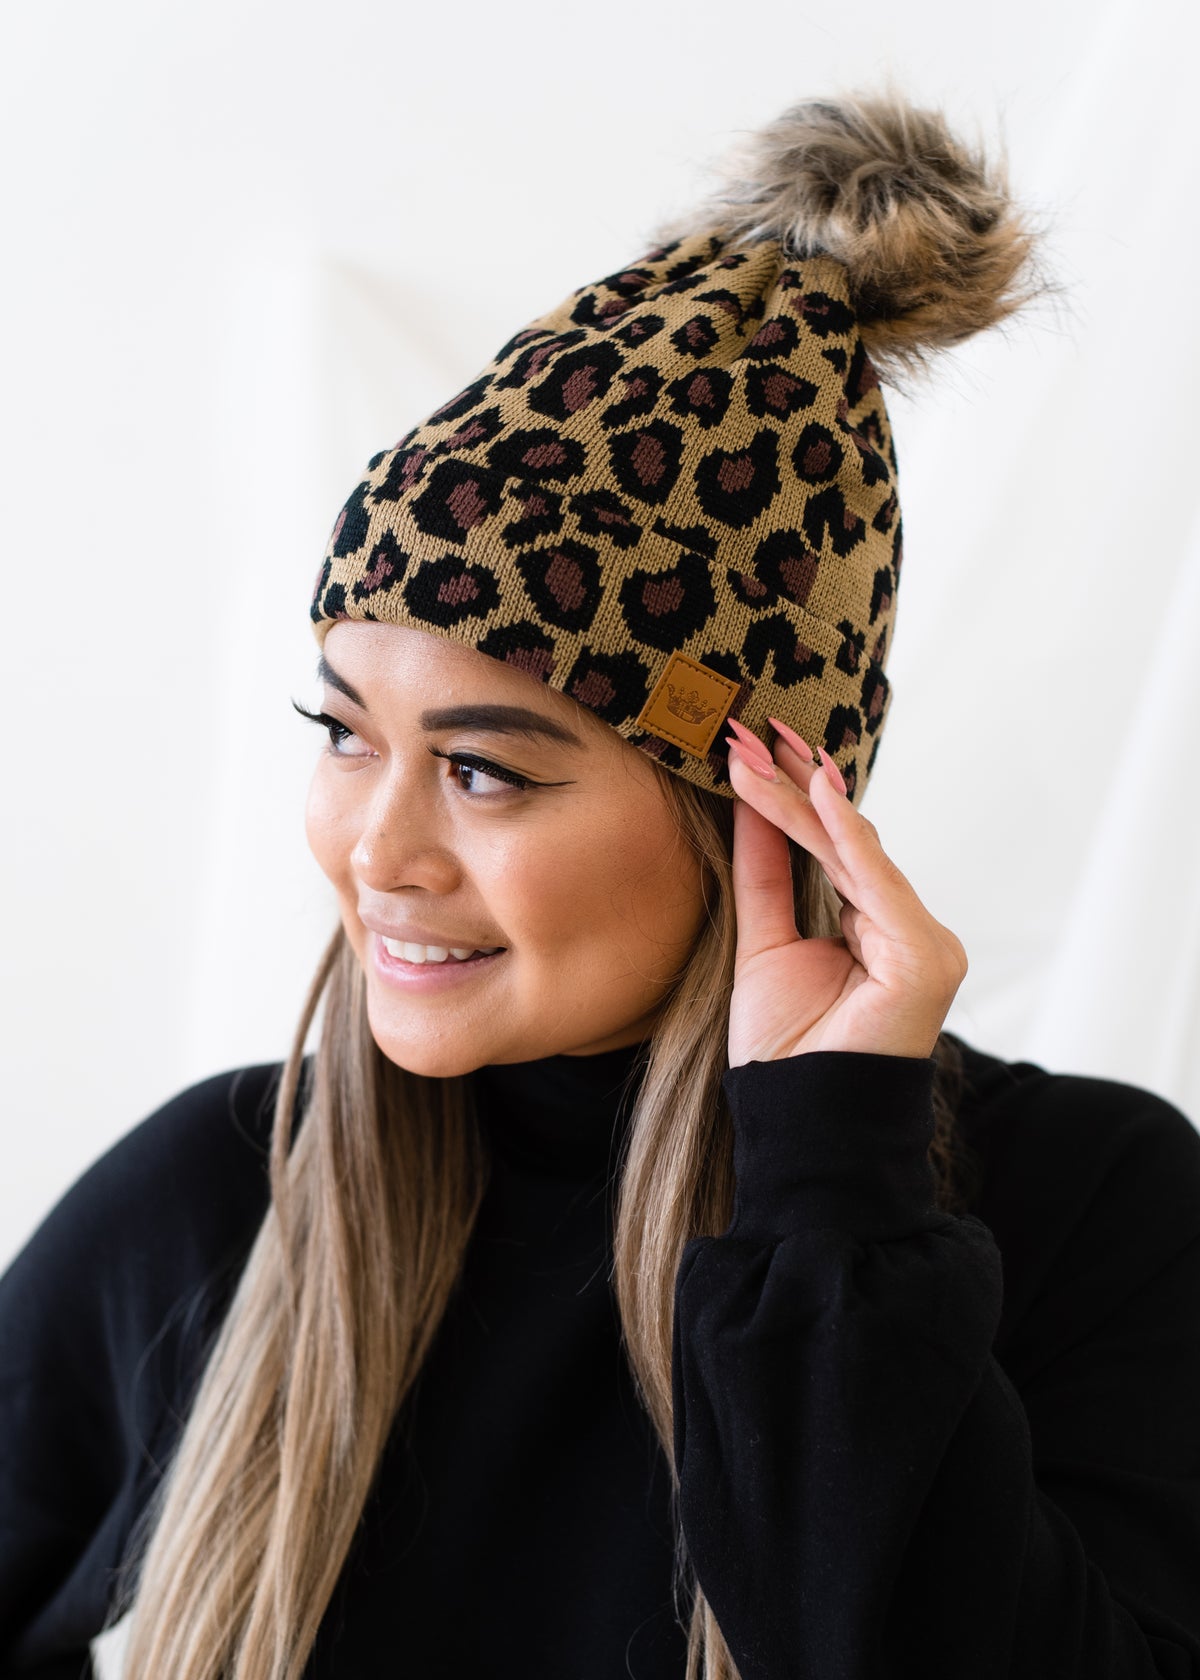 The Leopard Pom Hat